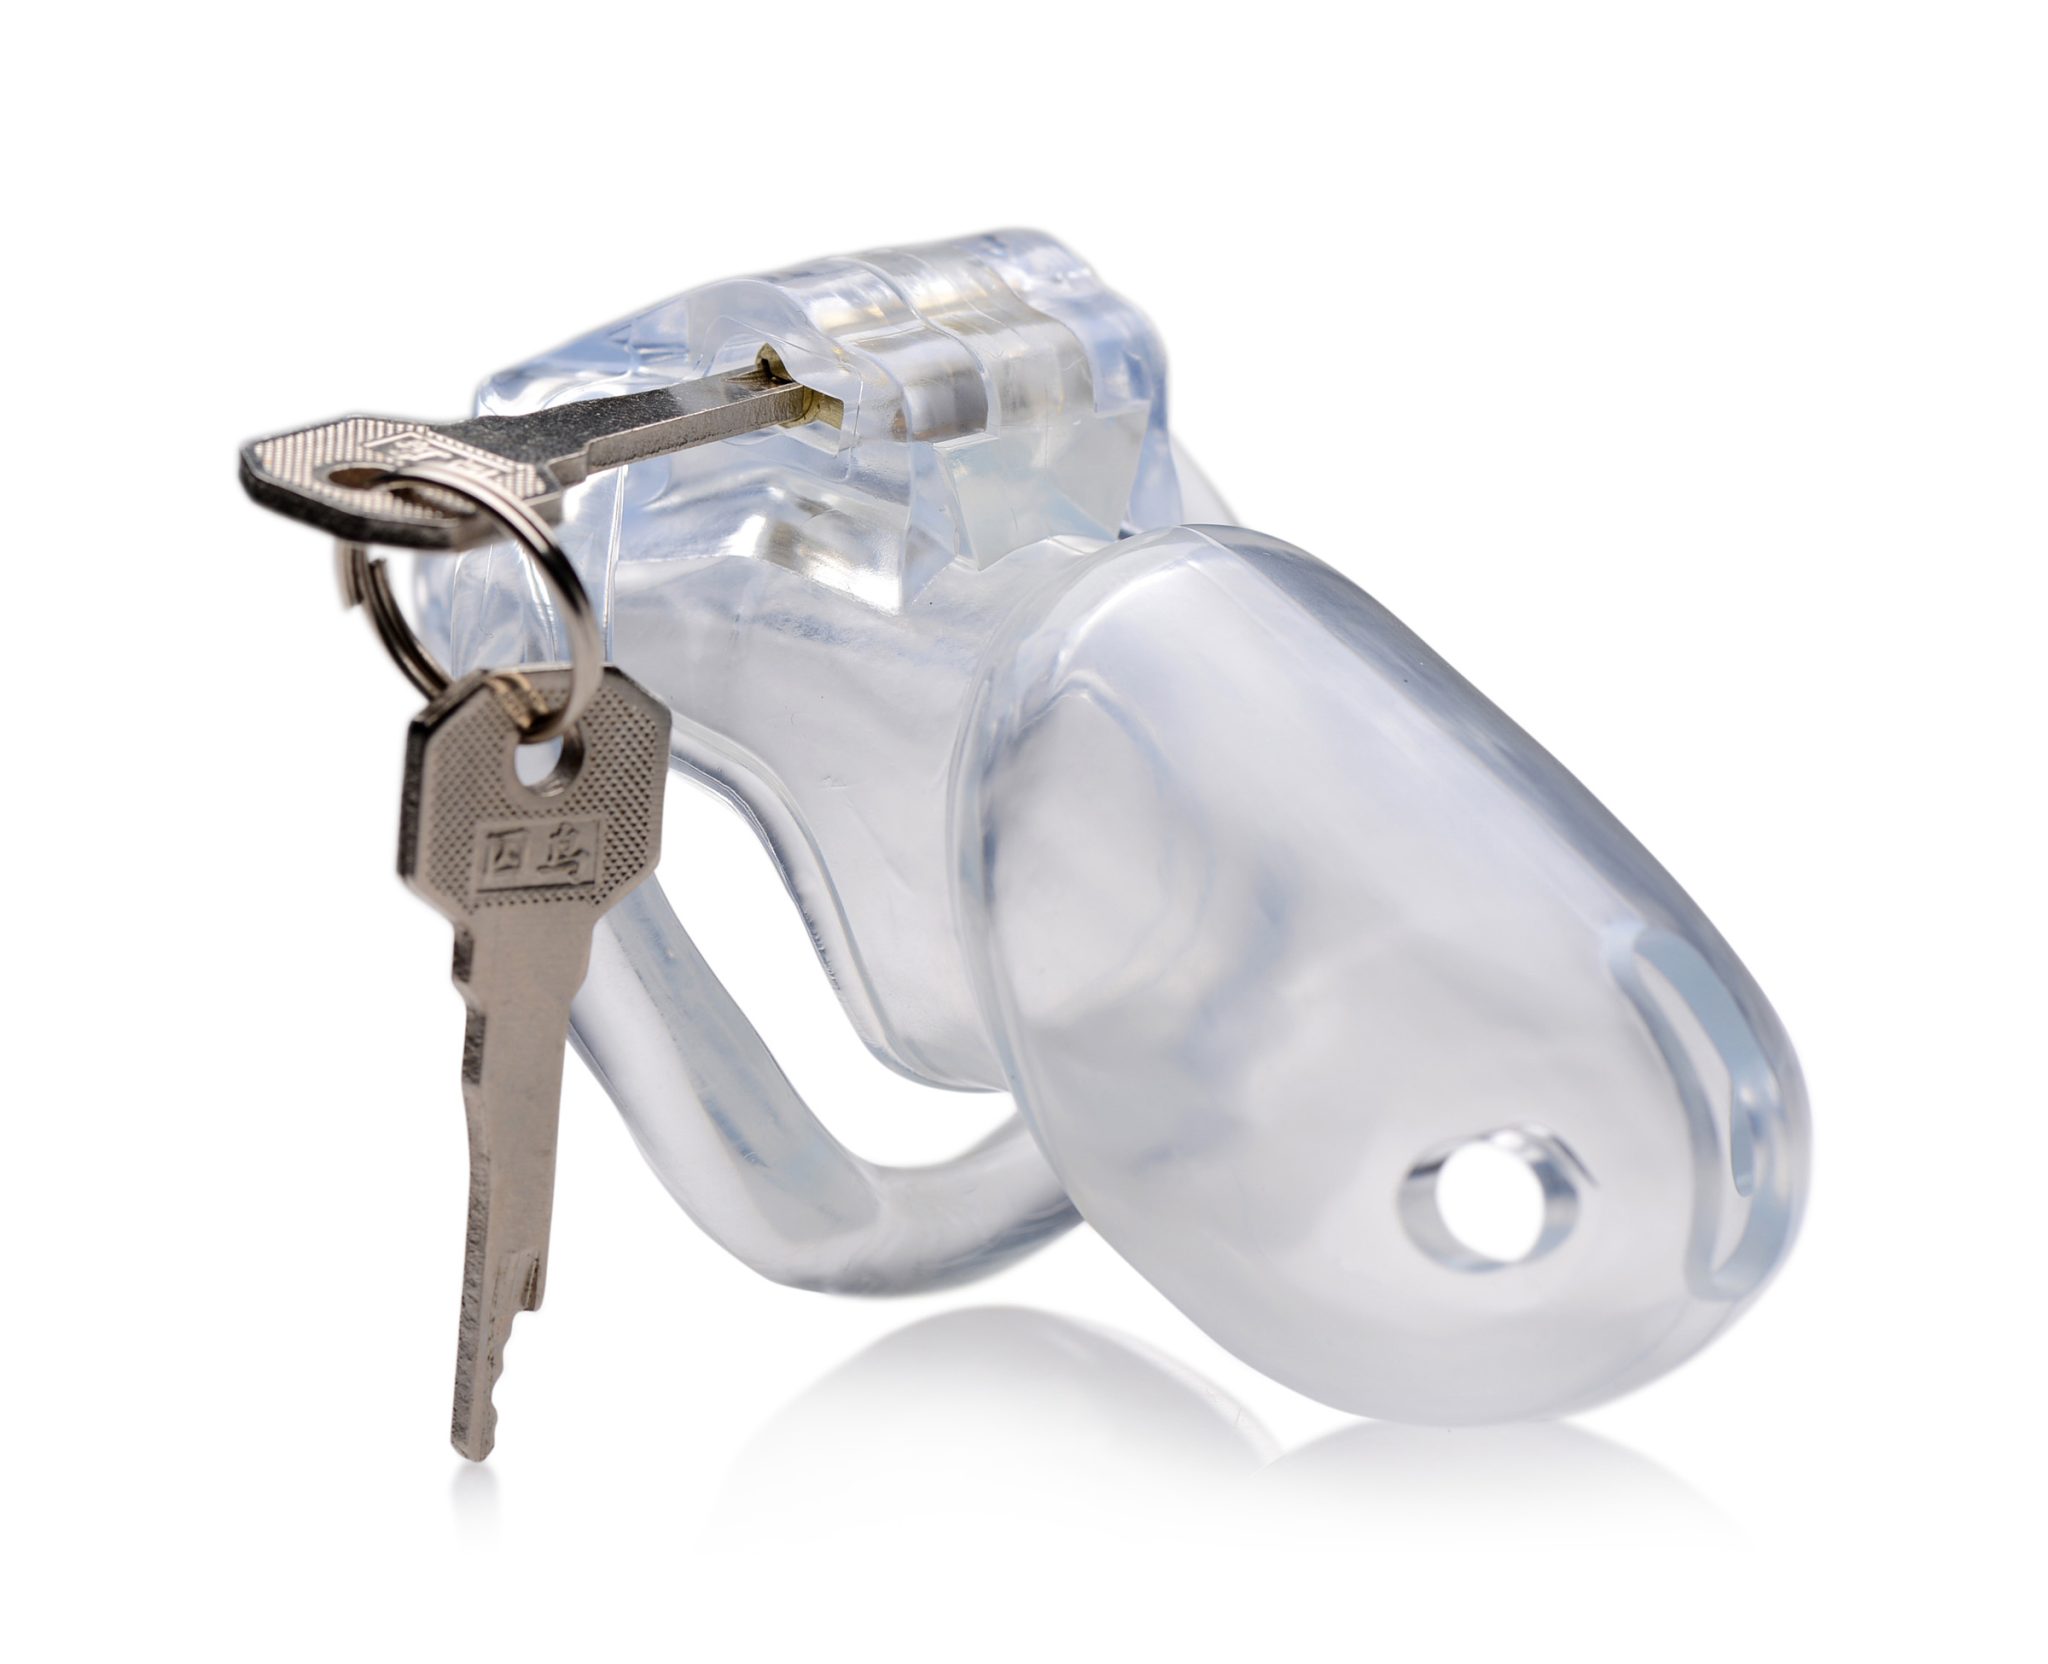 Clear Captor Chastity Cage – Large